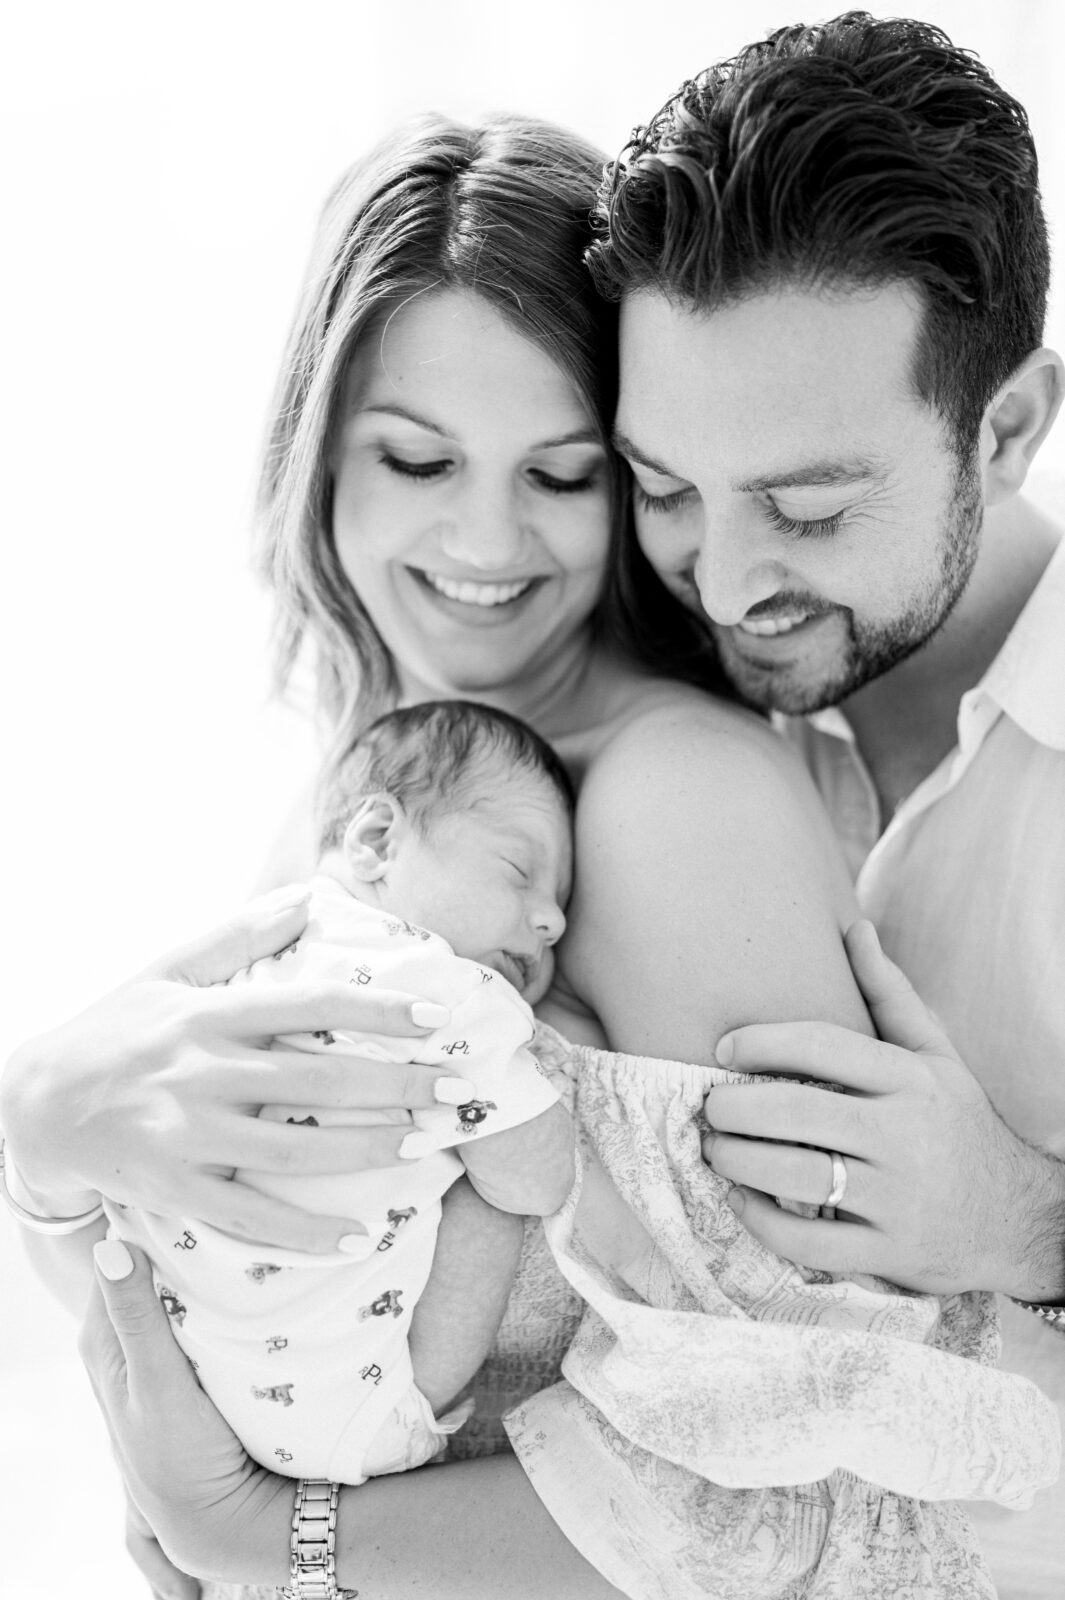 Black and white new family portrait with newborn